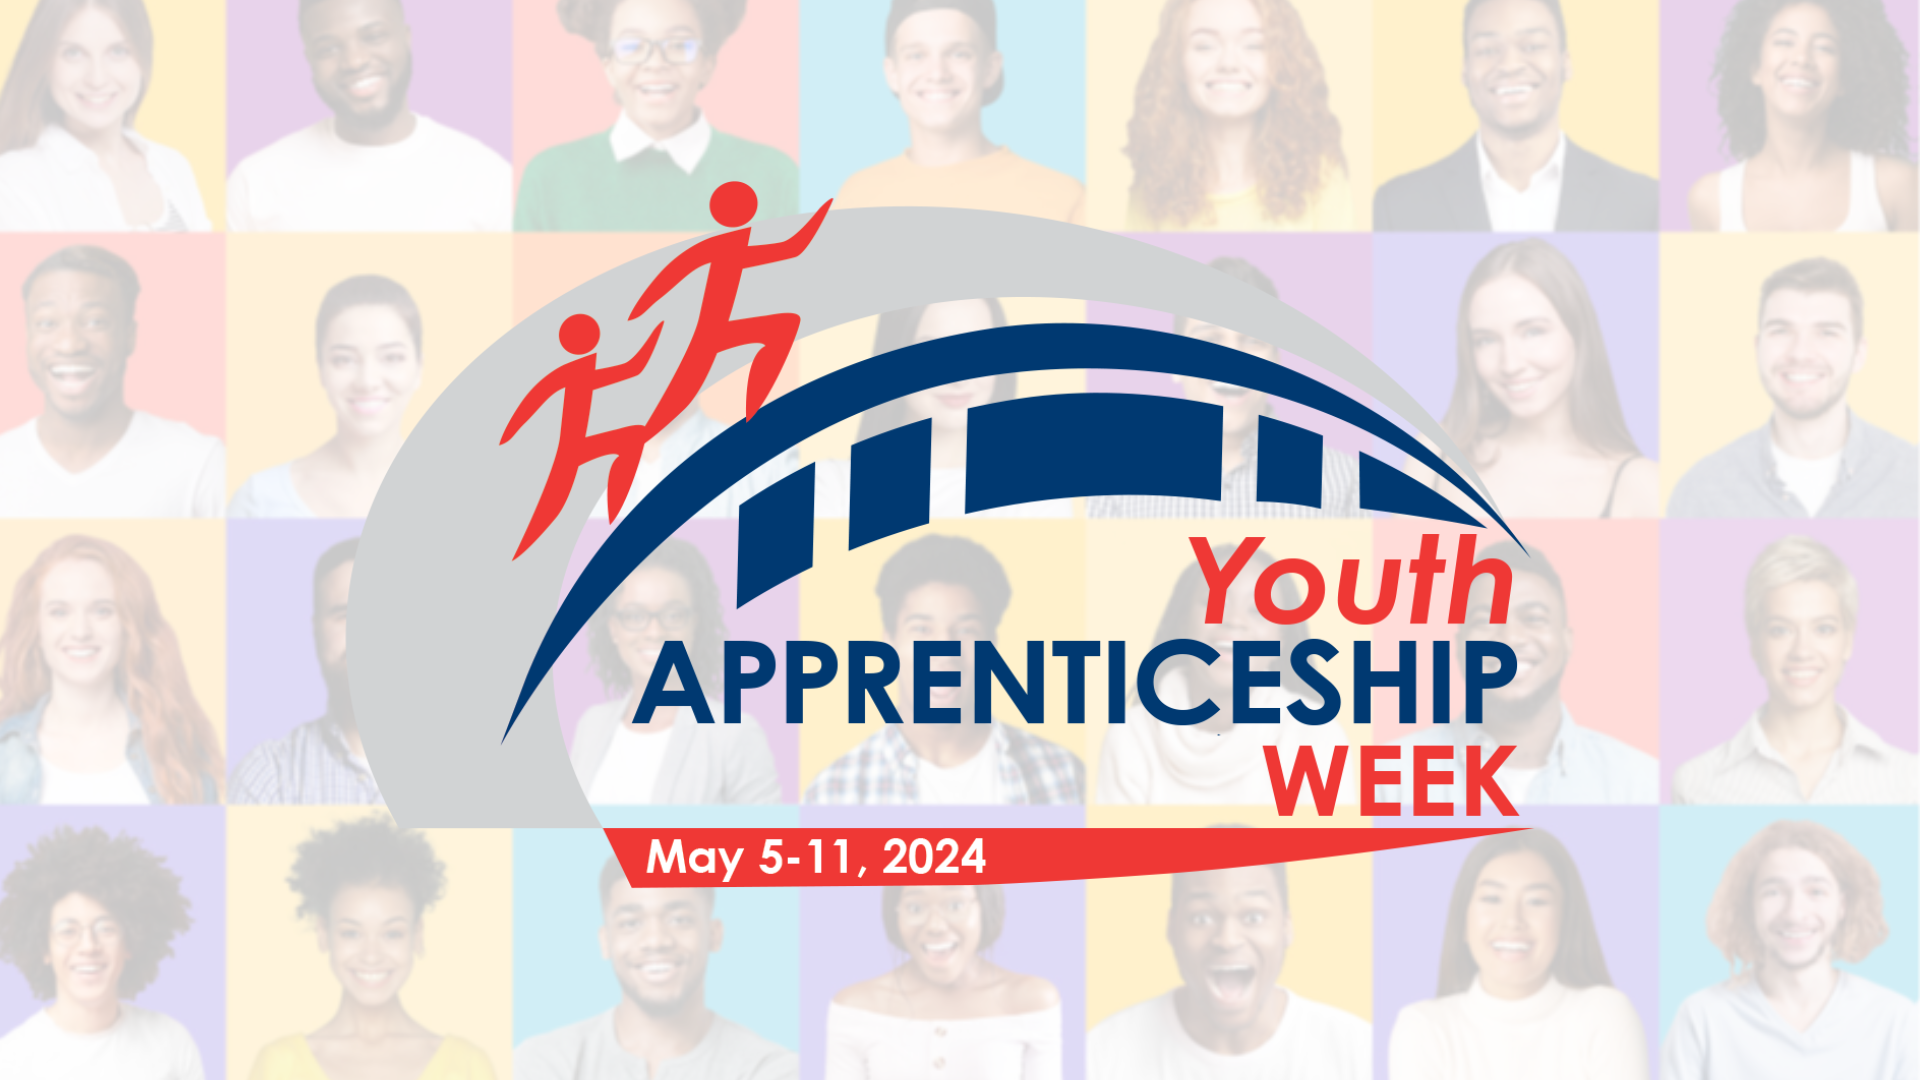 Youth Apprenticeship Week May 5-11, 2024